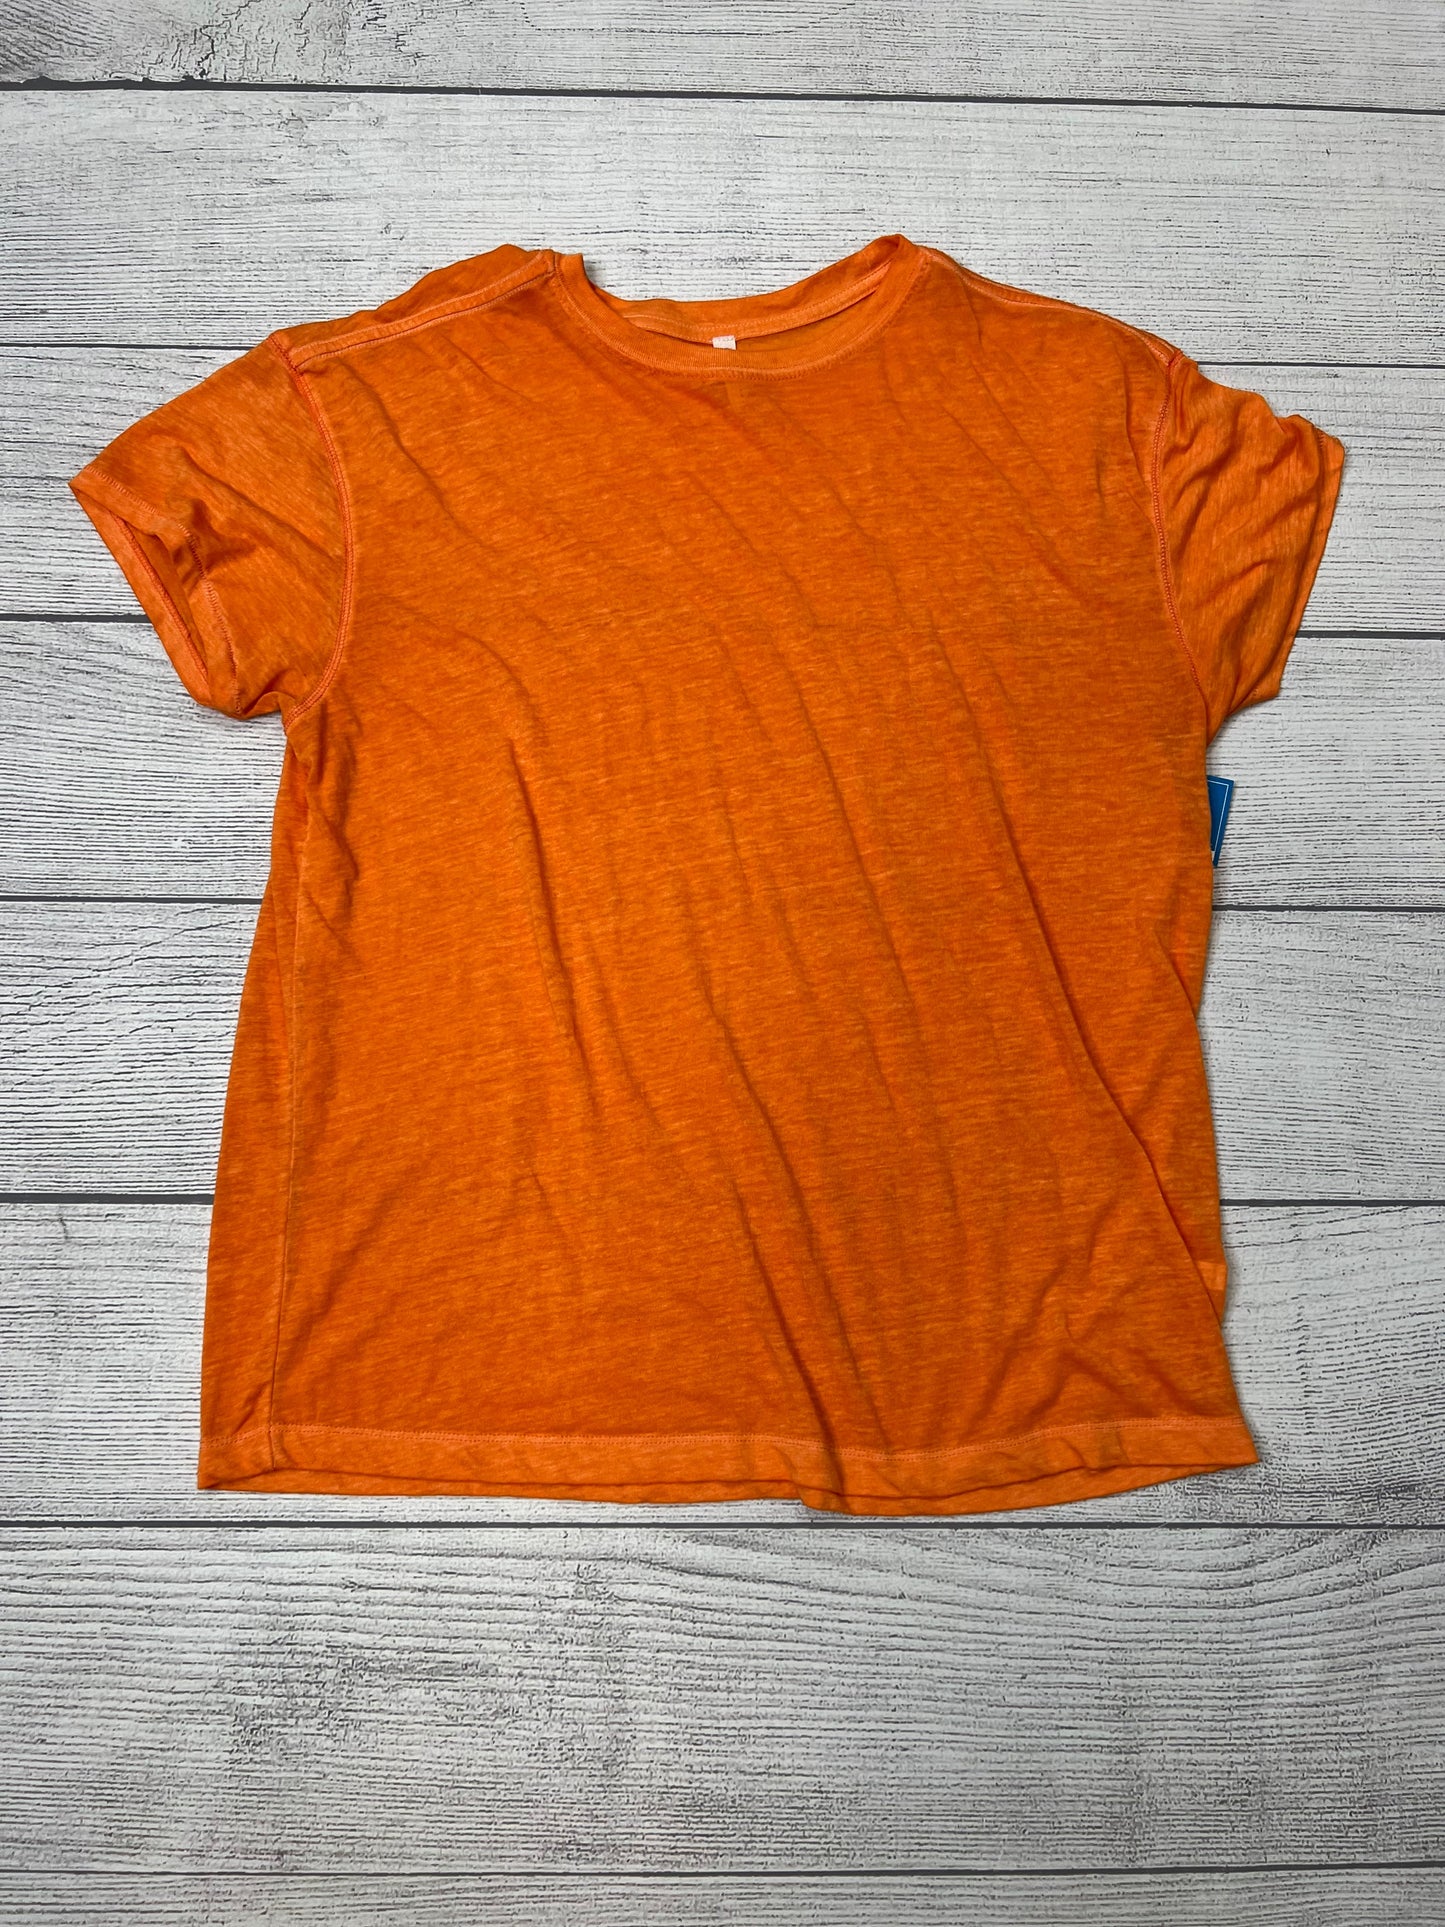 Athletic Top Short Sleeve By Free People  Size: L